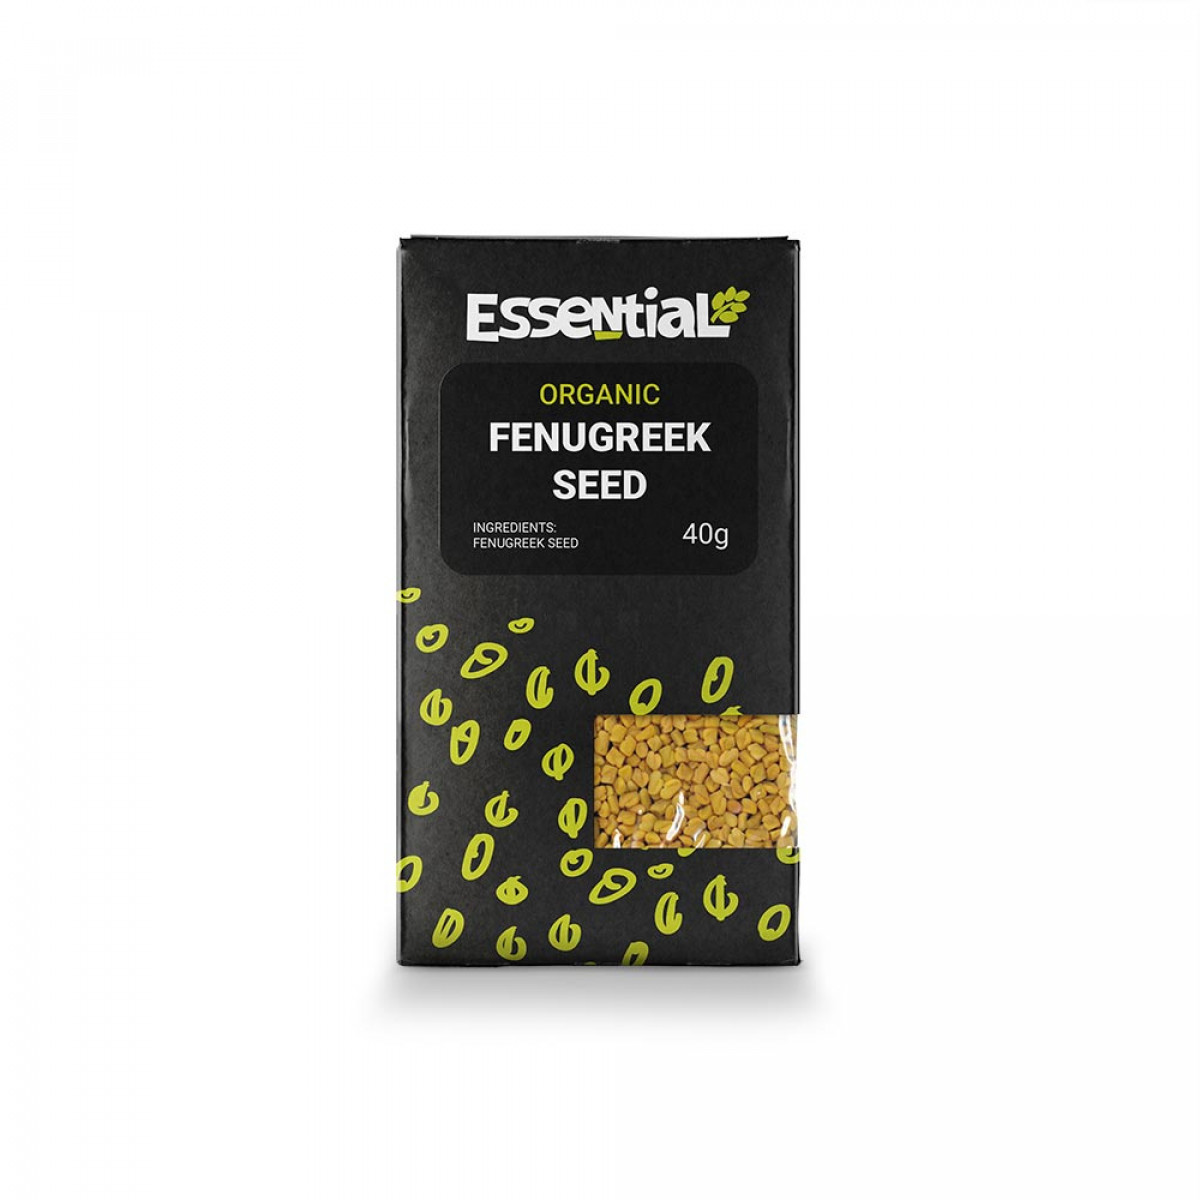 Product picture for Fenugreek Seed